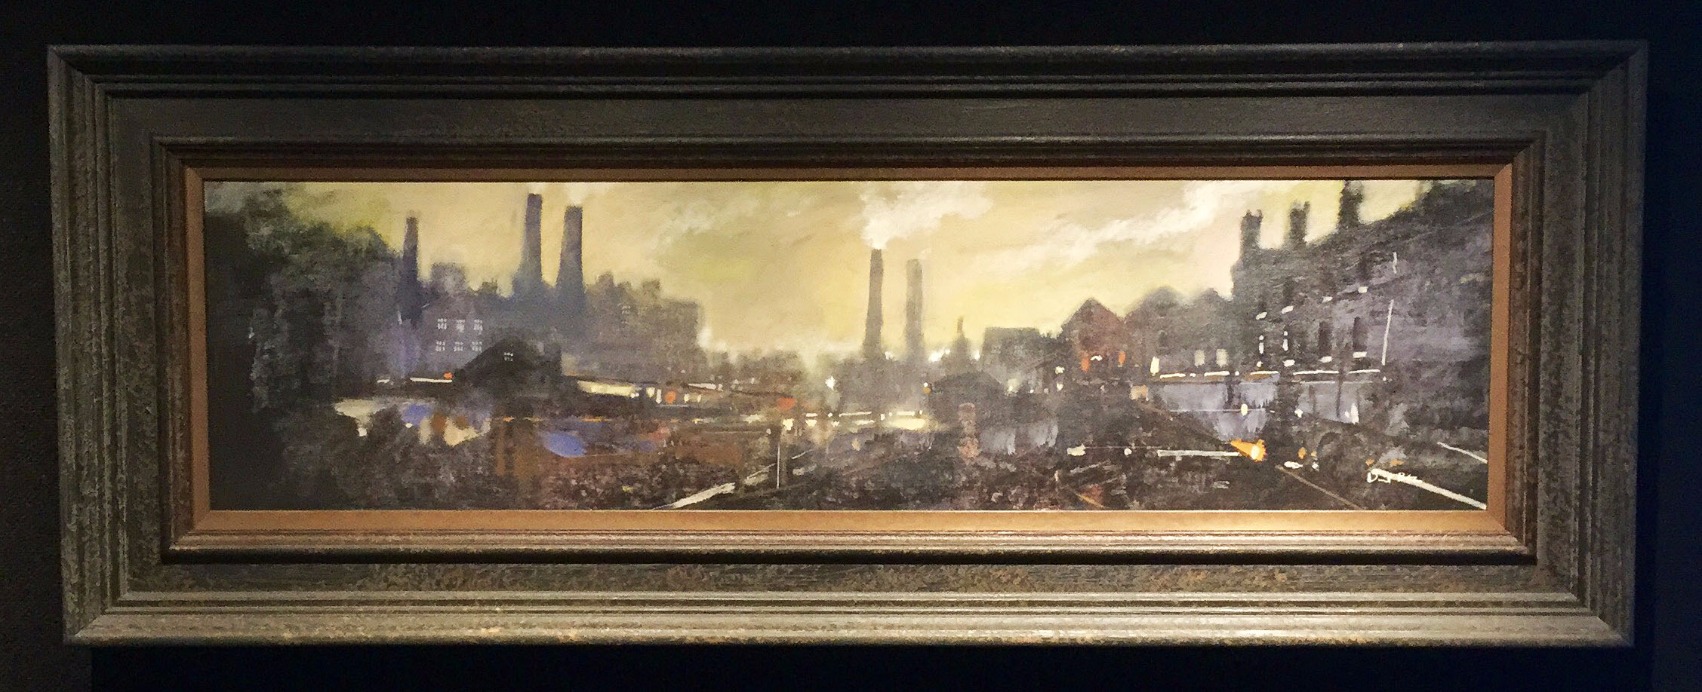 Another Working Day by David Bez, Northern | Nostalgic | Industrial | Landscape